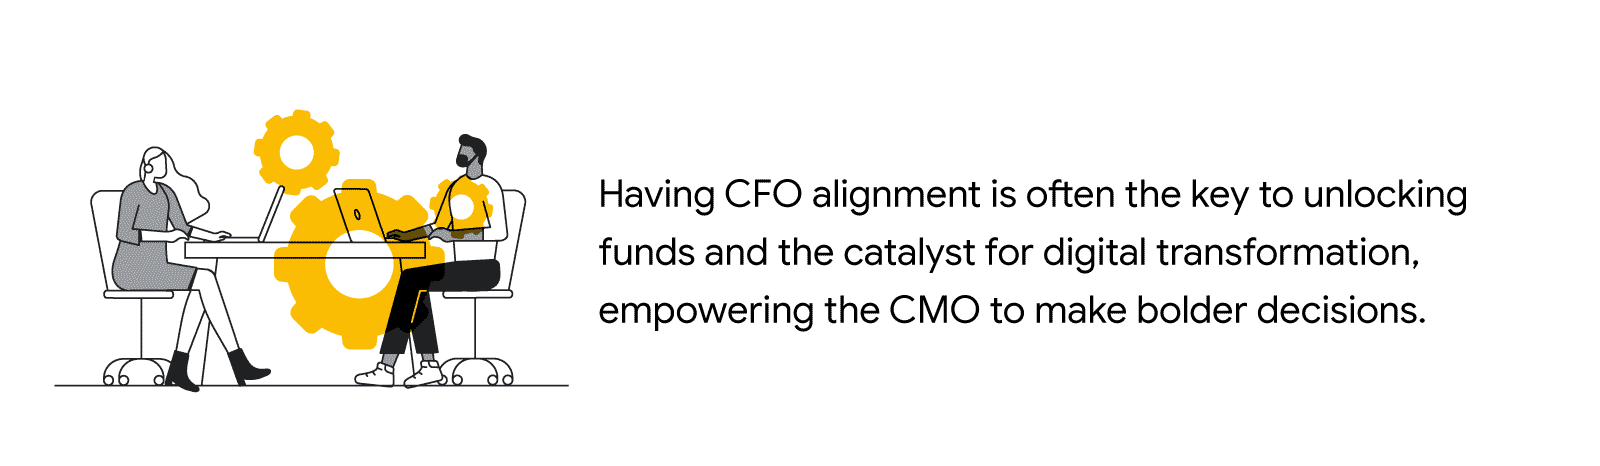 Black and white illustration of two people sitting
                at a table, using laptops, next to the quote: “Having
                CFO alignment is often the key to unlocking funds and
                the catalyst for digital transformation, empowering the
                CMO to make bolder decisions.